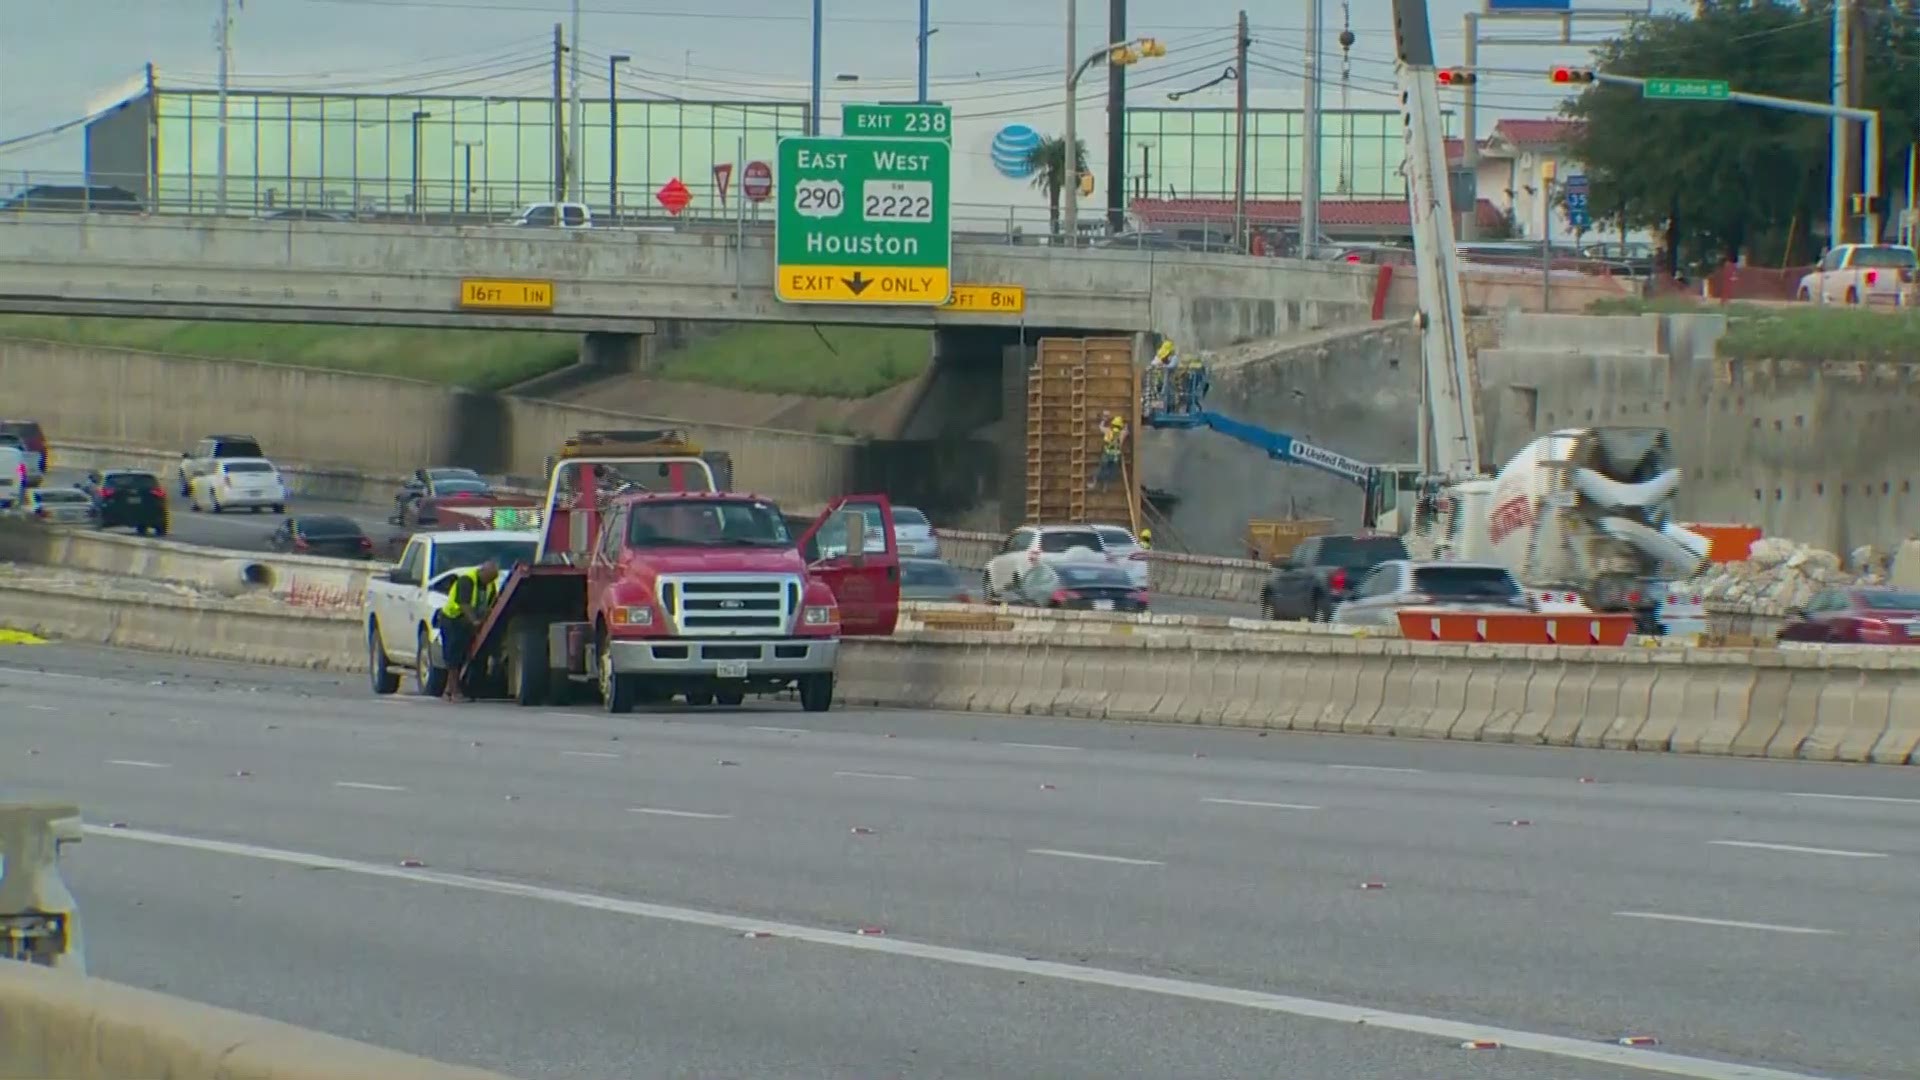 Northbound lanes of Interstate 35 in Austin were closed Friday after a man was reportedly hit and killed by a vehicle. Here's a look at the scene.